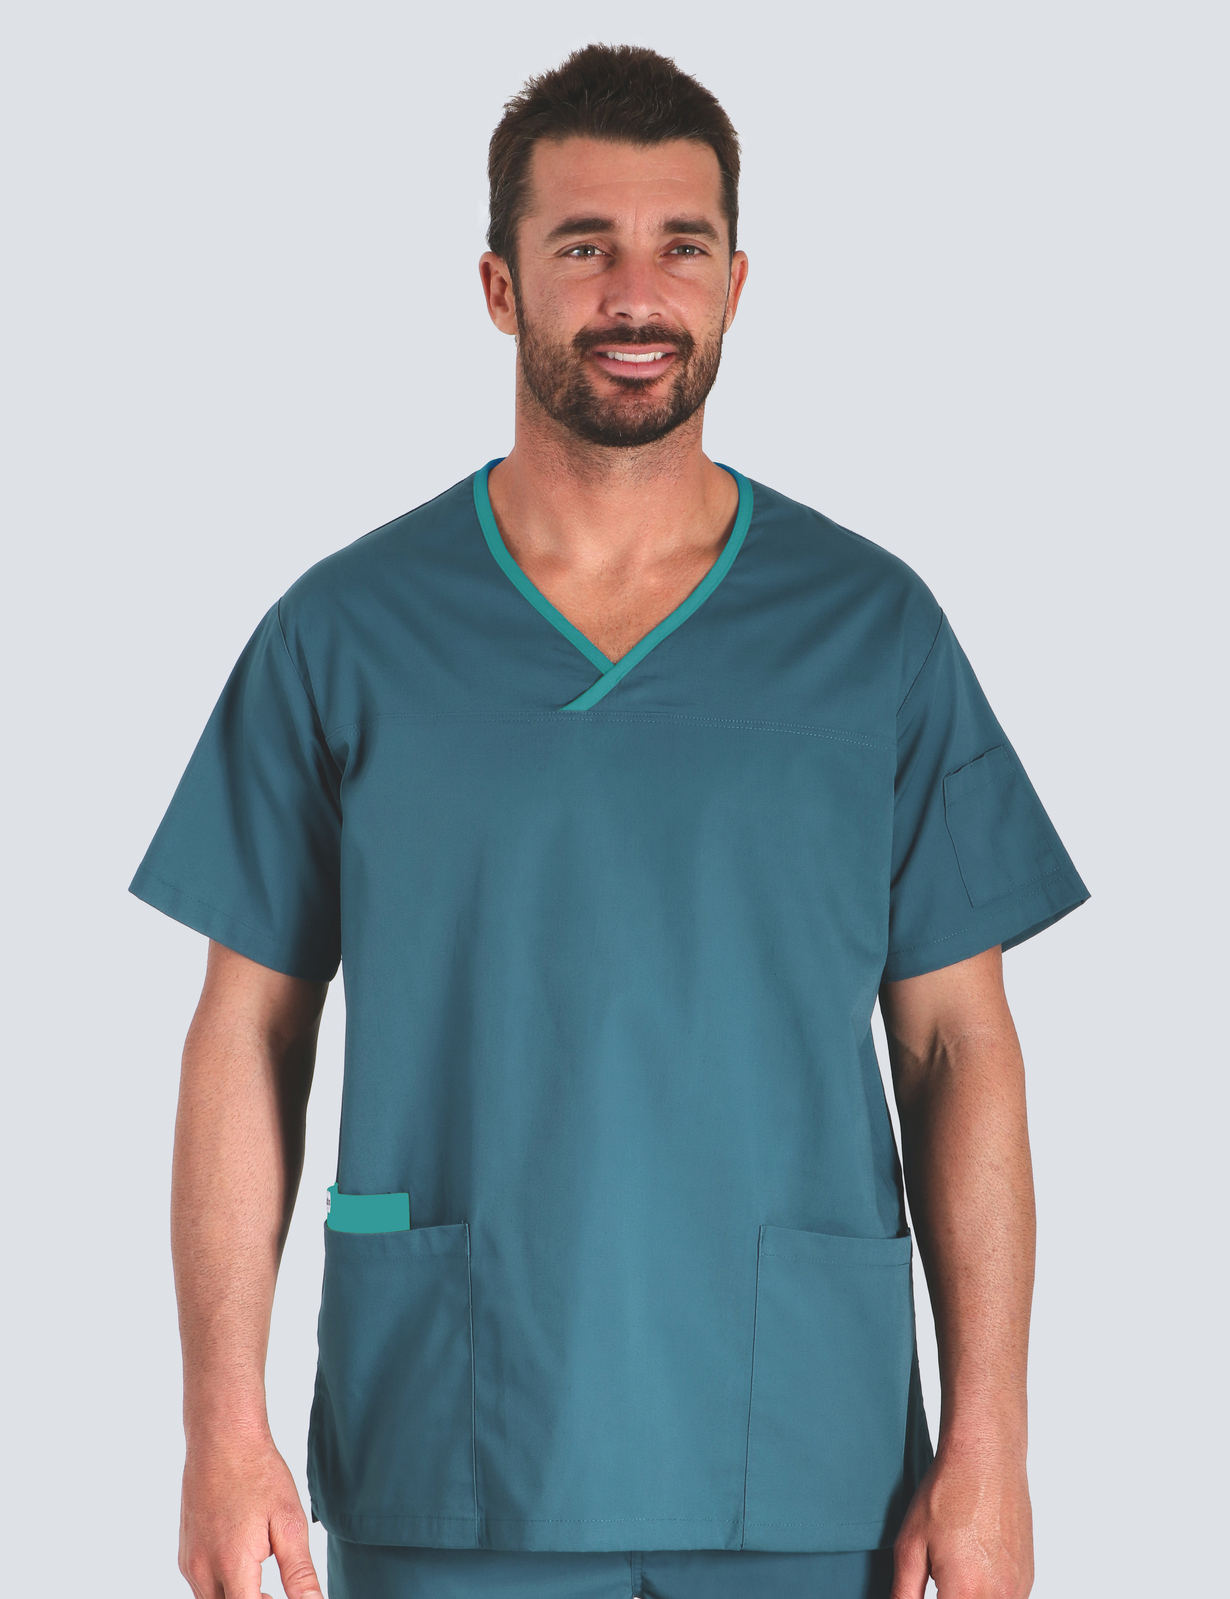 Northside Vets - Vet (Men's Fit Solid Scrub Top in Caribbean with Teal Trim incl Logos)